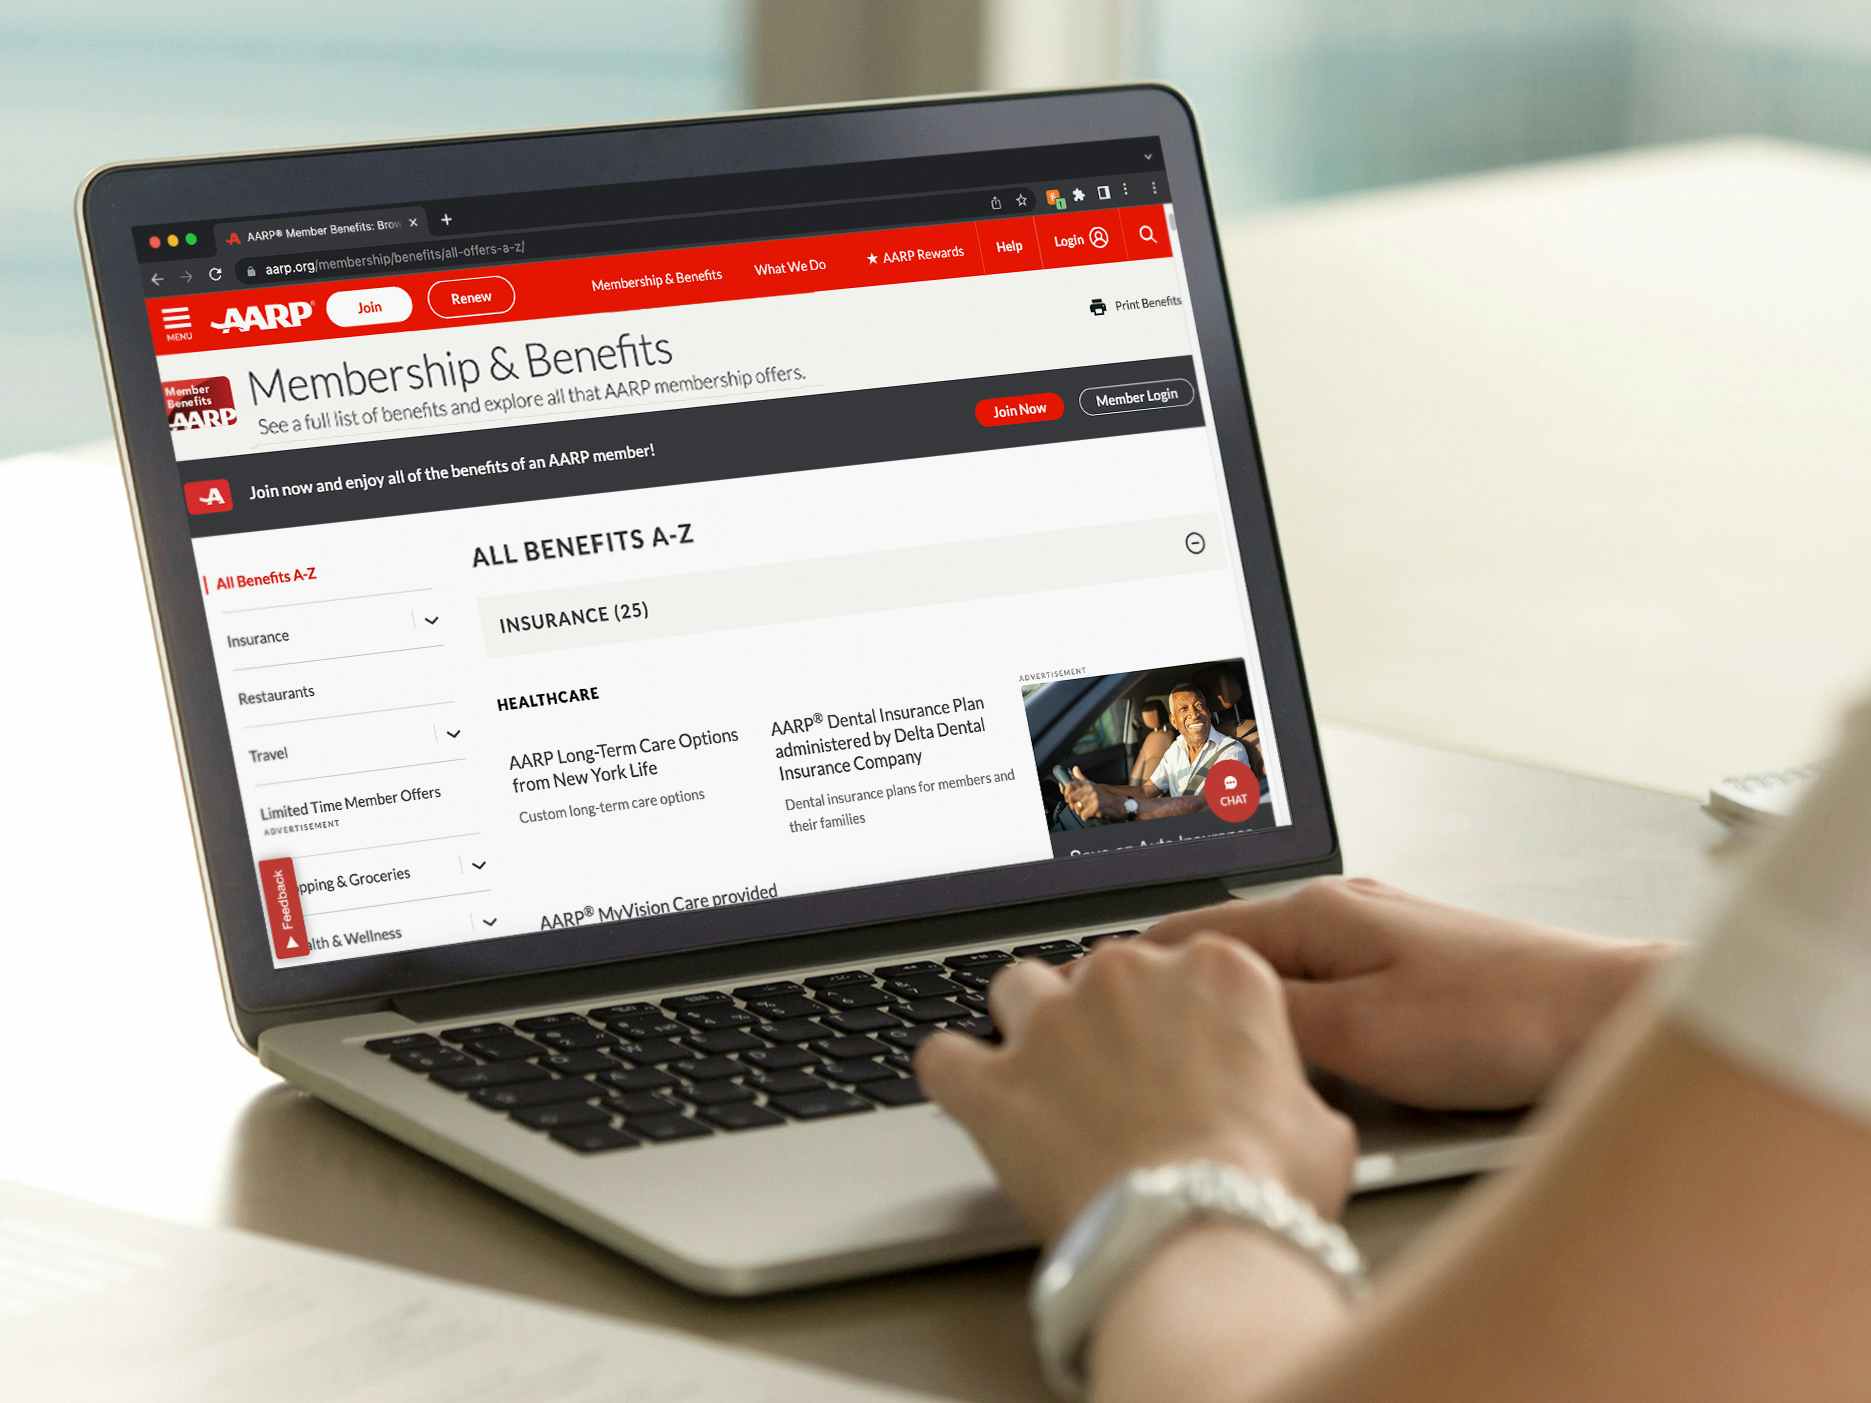 A person using a laptop displaying the AARP website's Member Benefits